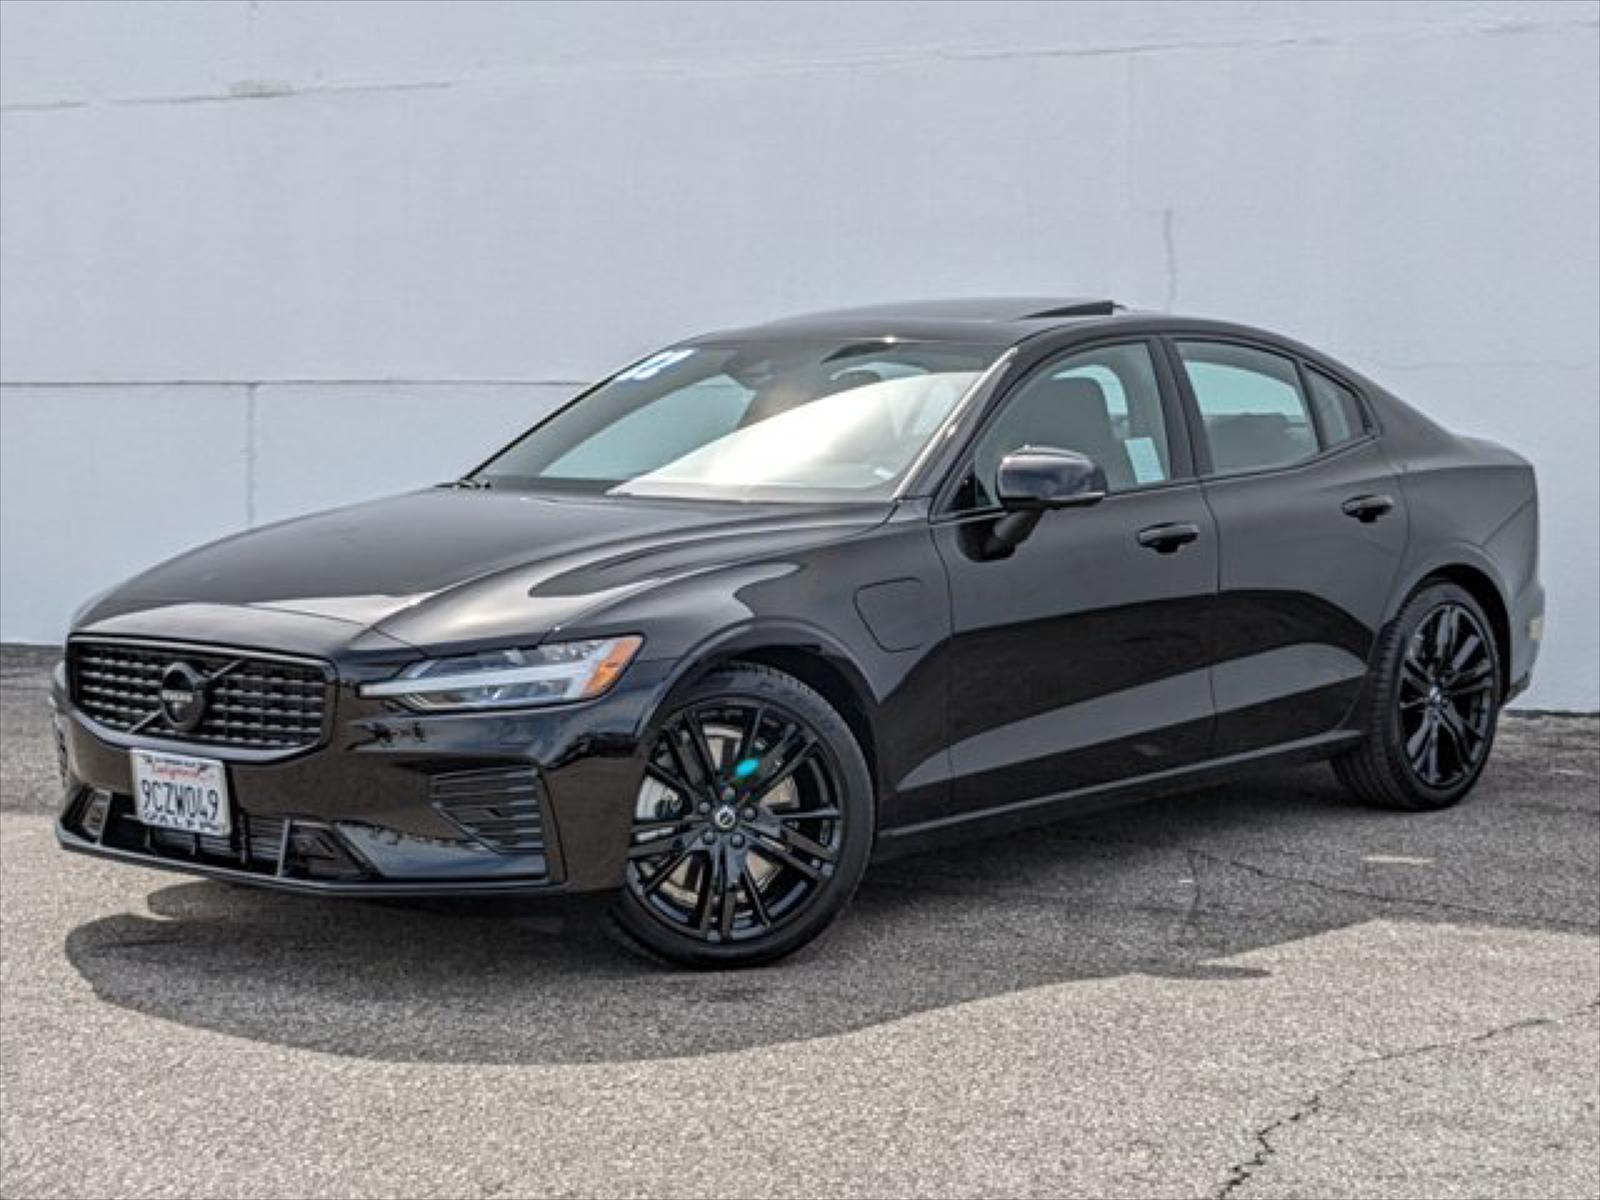 2022 Volvo S60 Recharge Plug-In Hybrid T8 Black Edition R-Design Extended  Range for Sale Van Nuys, Los Angeles, CA, Specials, Incentives, Rebates,  Lease Deals - Galpin Ford